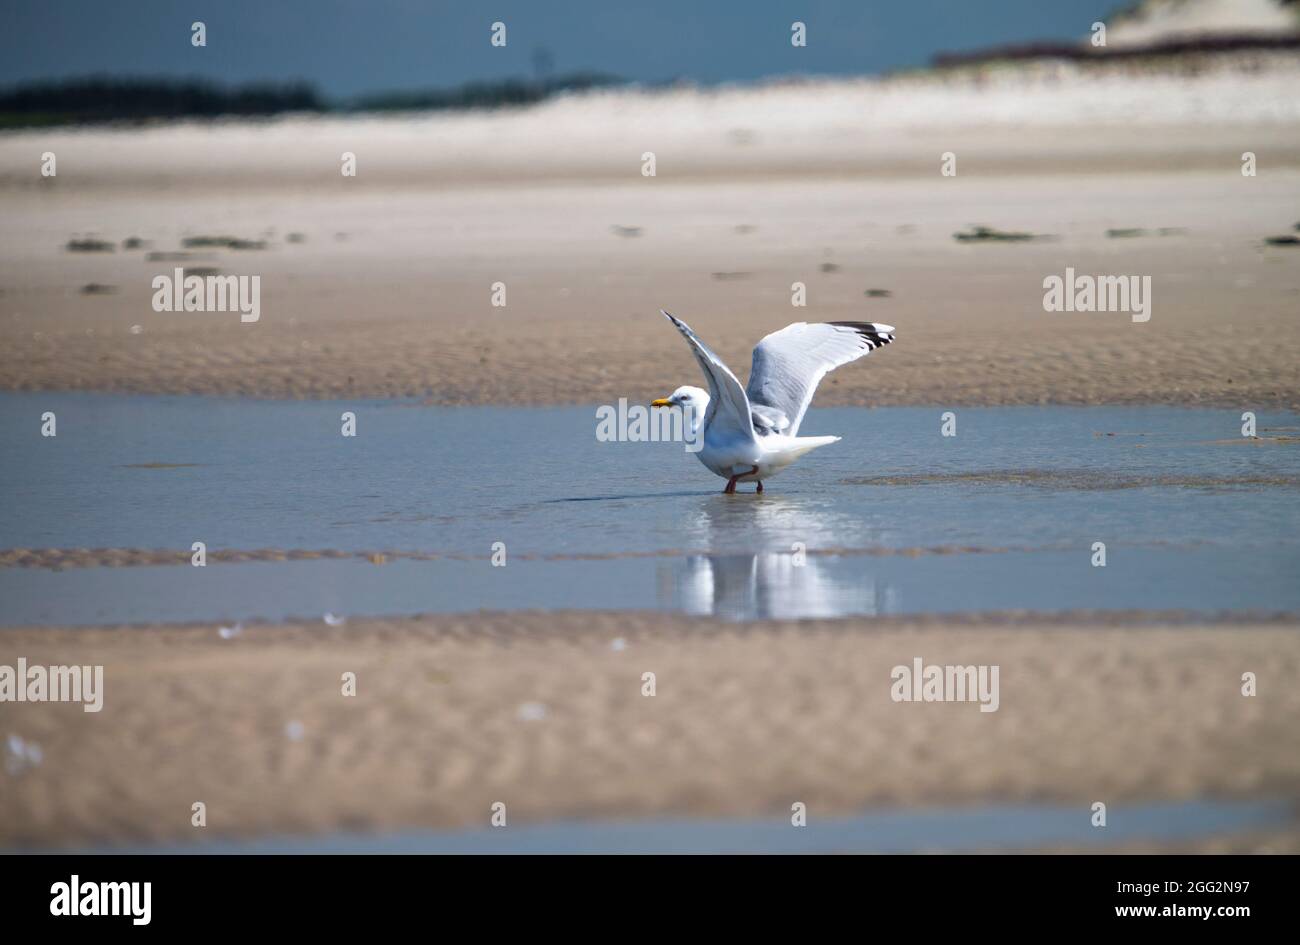 The photo shows a seagull on a North Sea beach Stock Photo